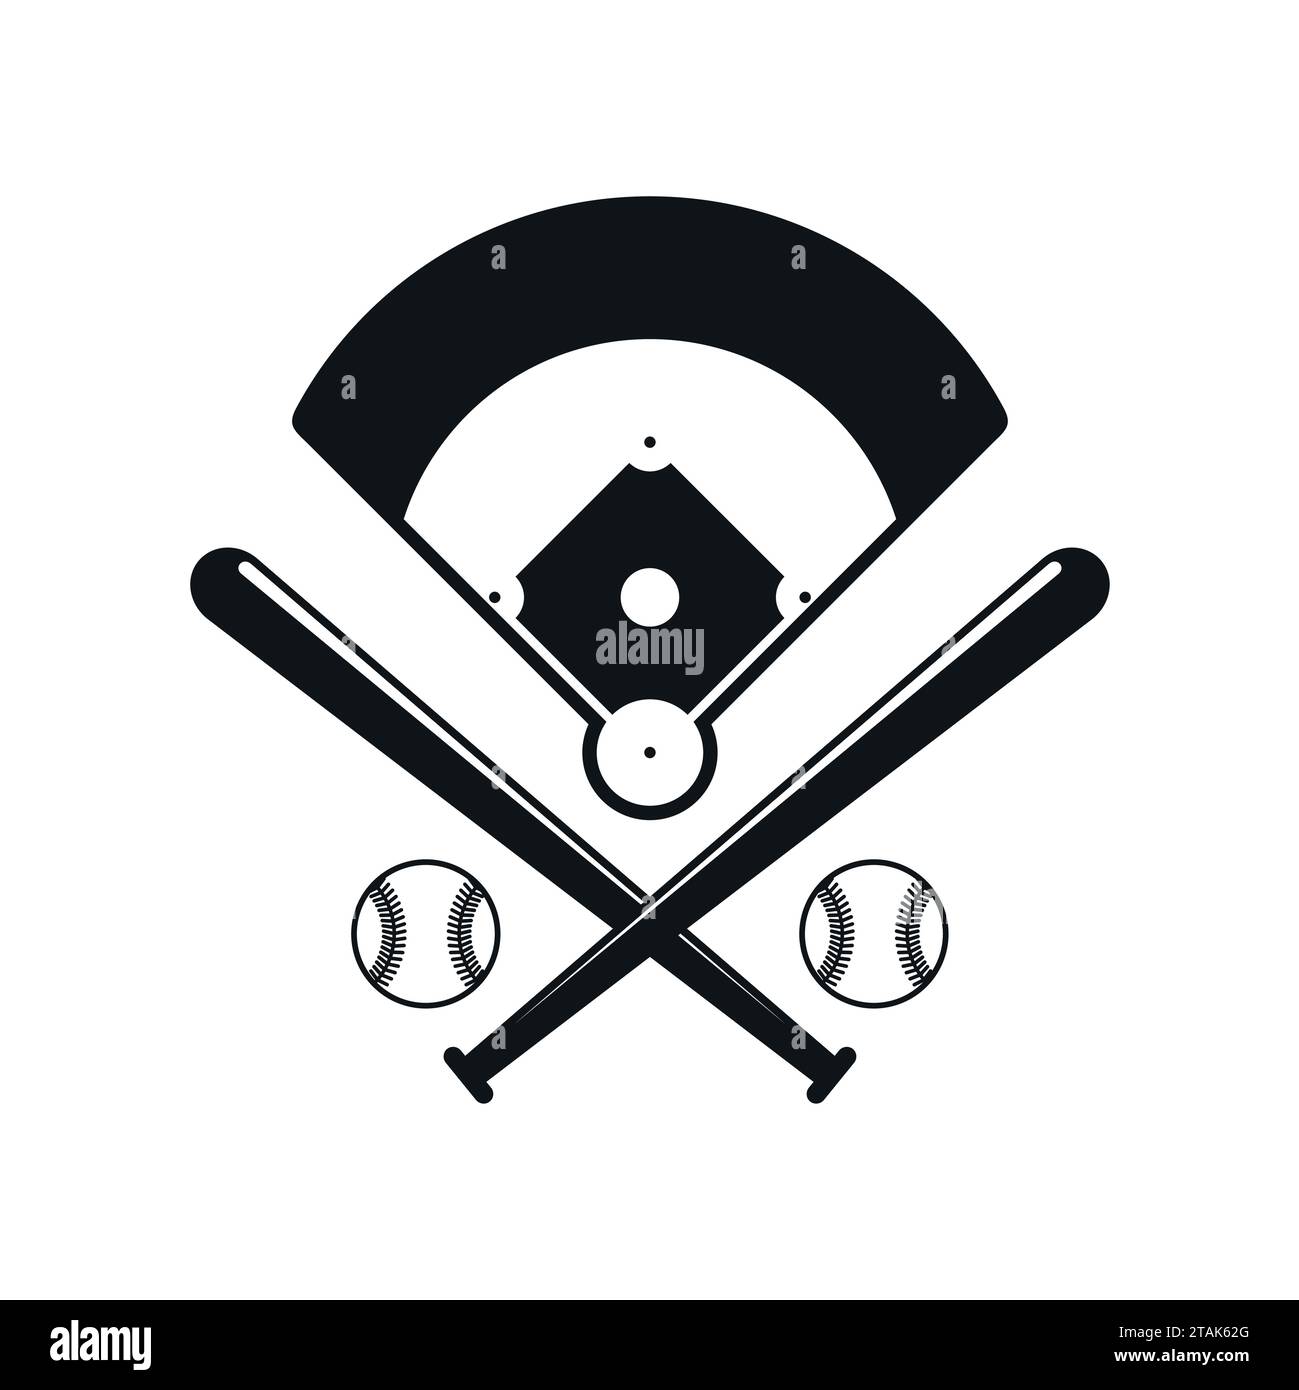 Baseball icons. Field, bals and baseball bats in flat style isolated on white background Stock Vector